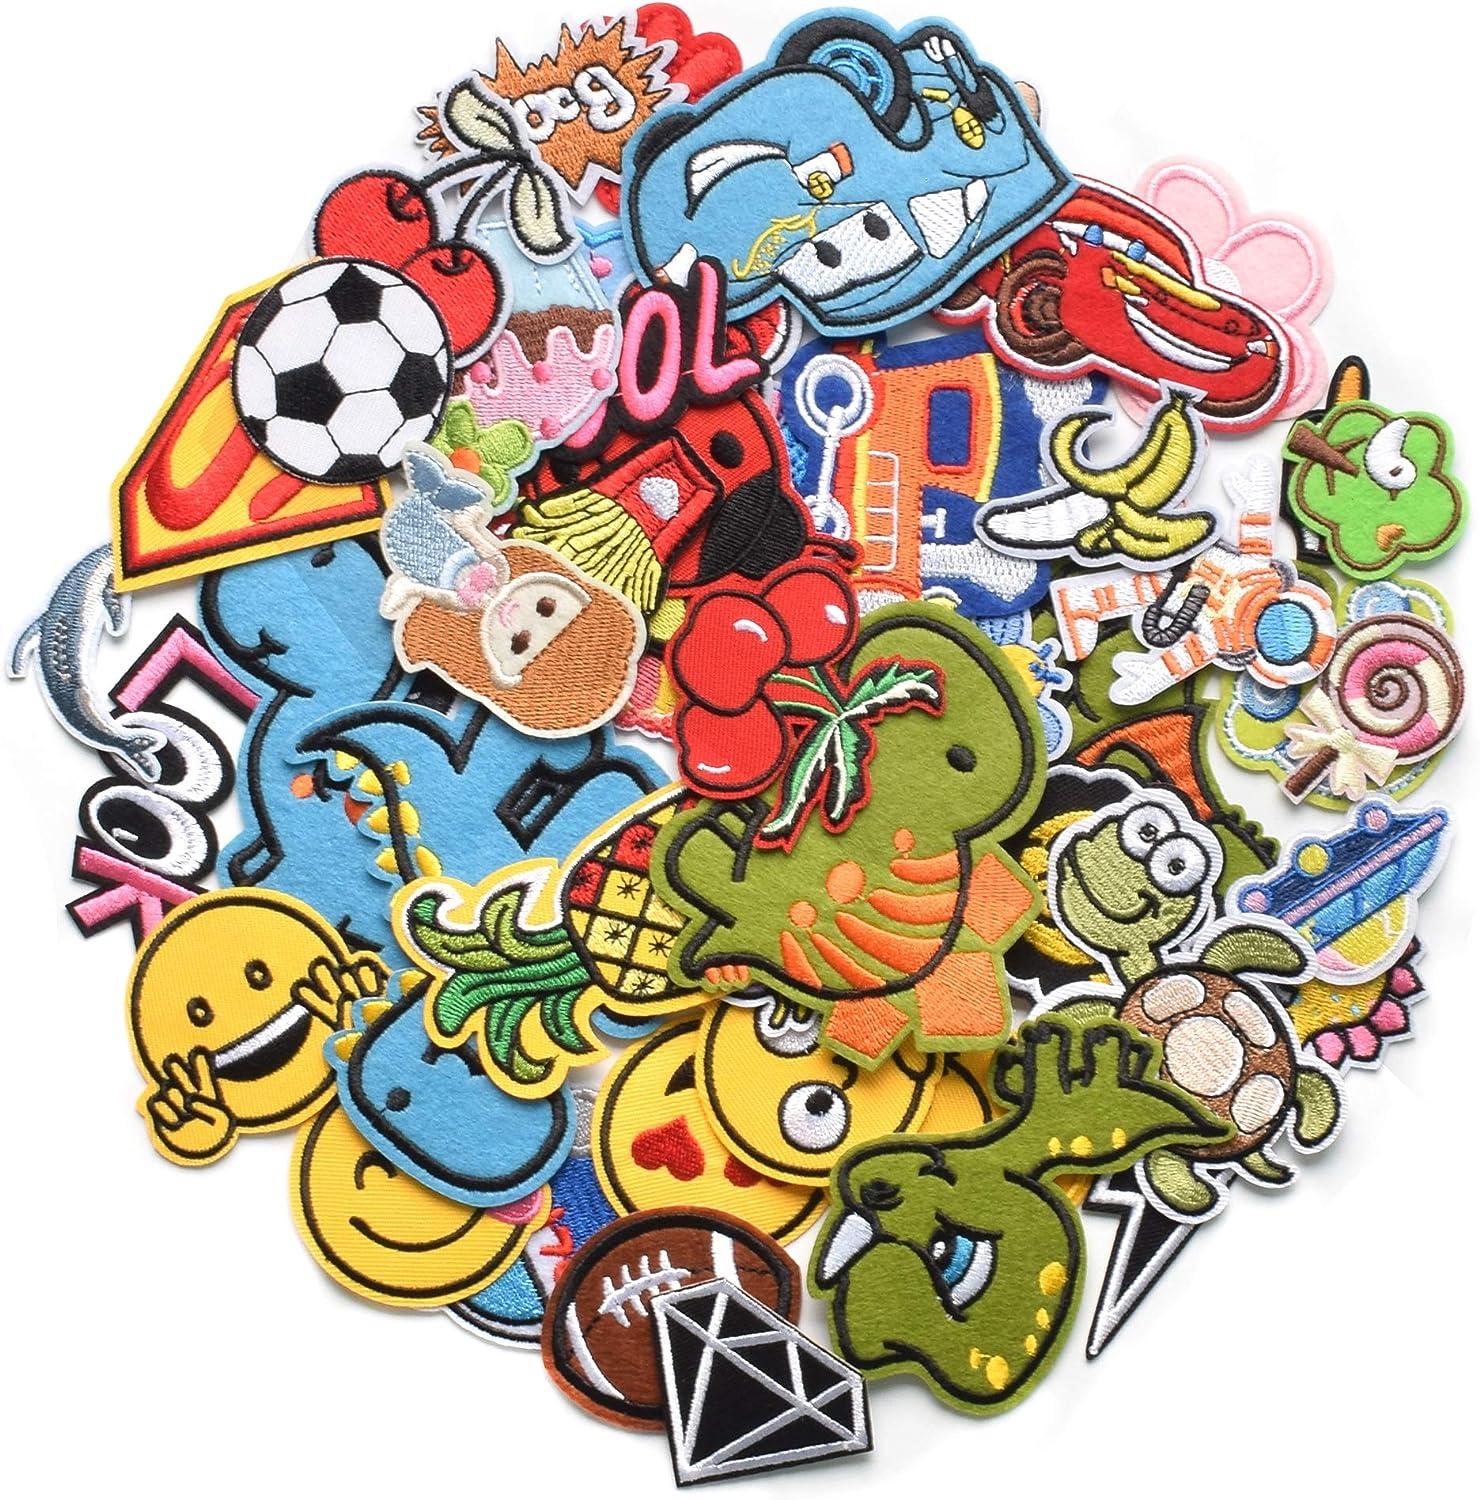 Harsgs 60pcs Random Assorted Styles Embroidered Patches, Bright